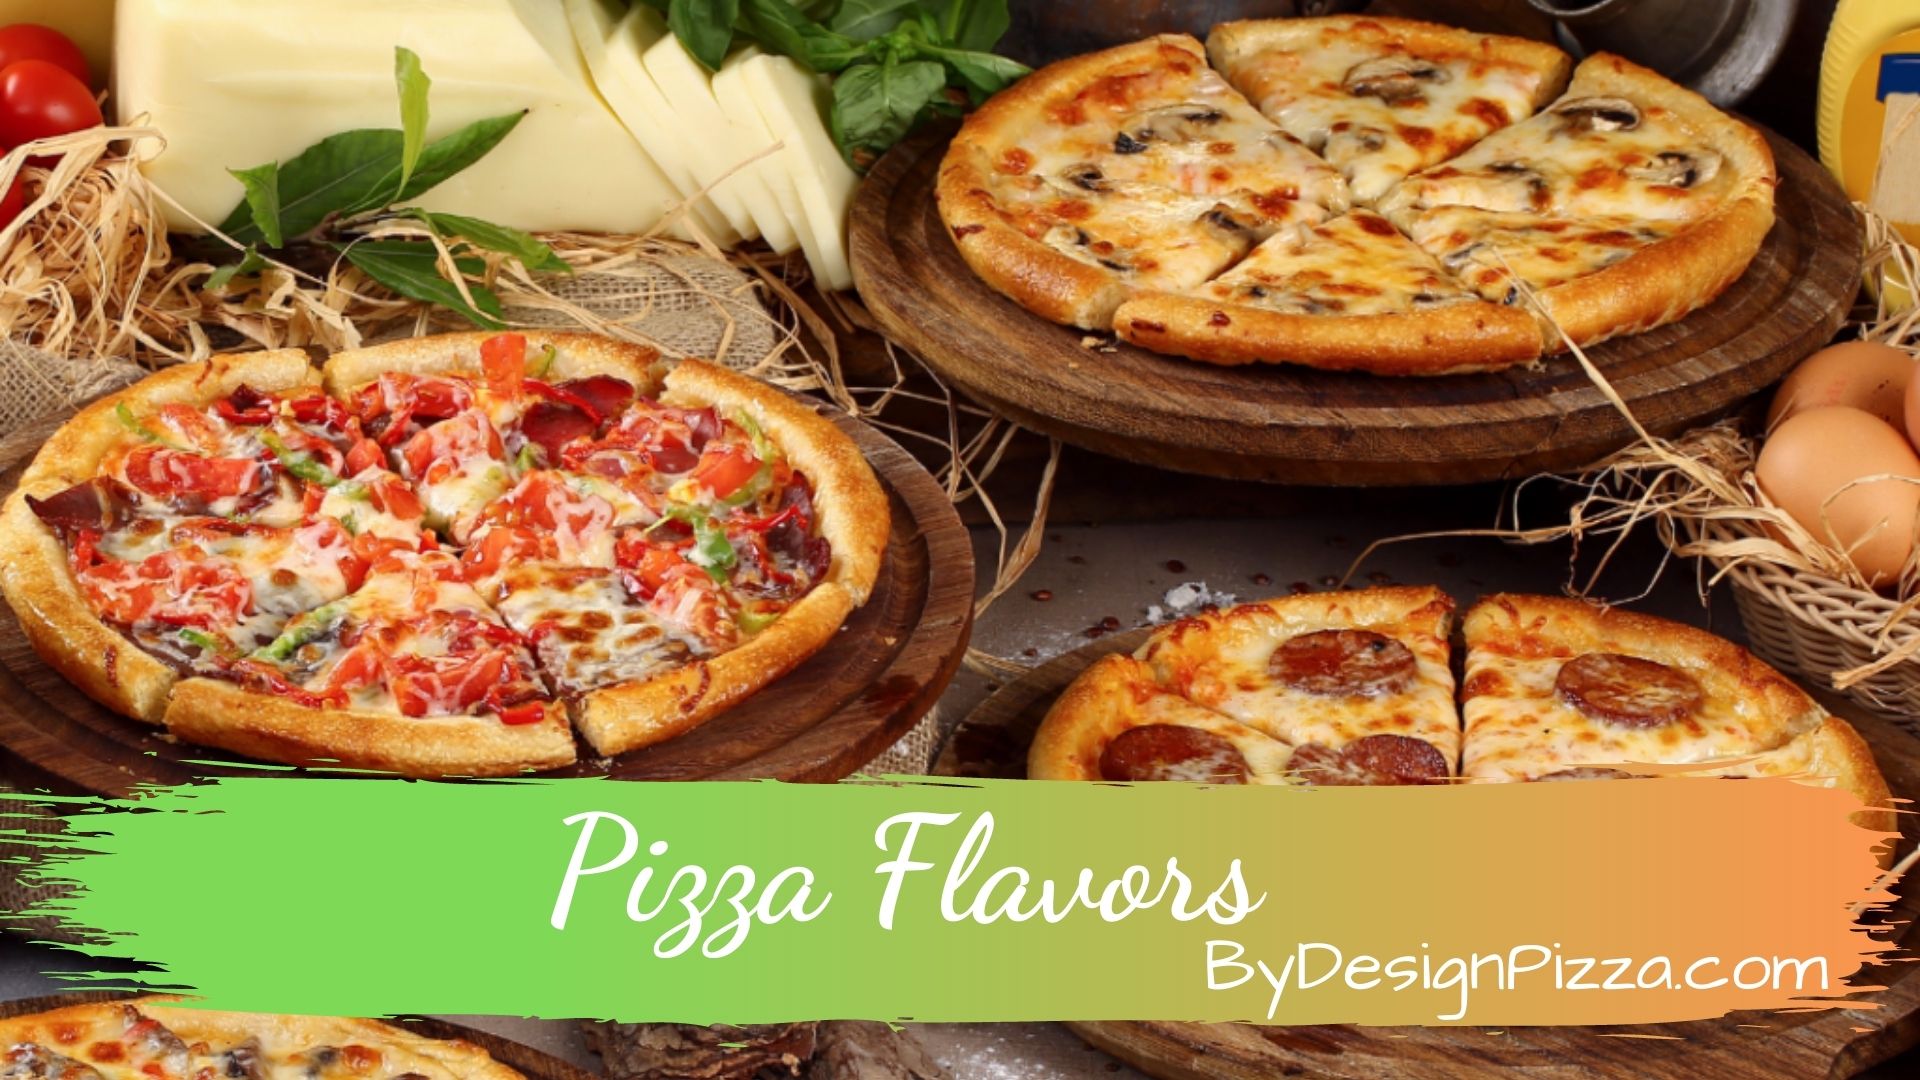 What Are The Different Kind Of Pizza Flavors?